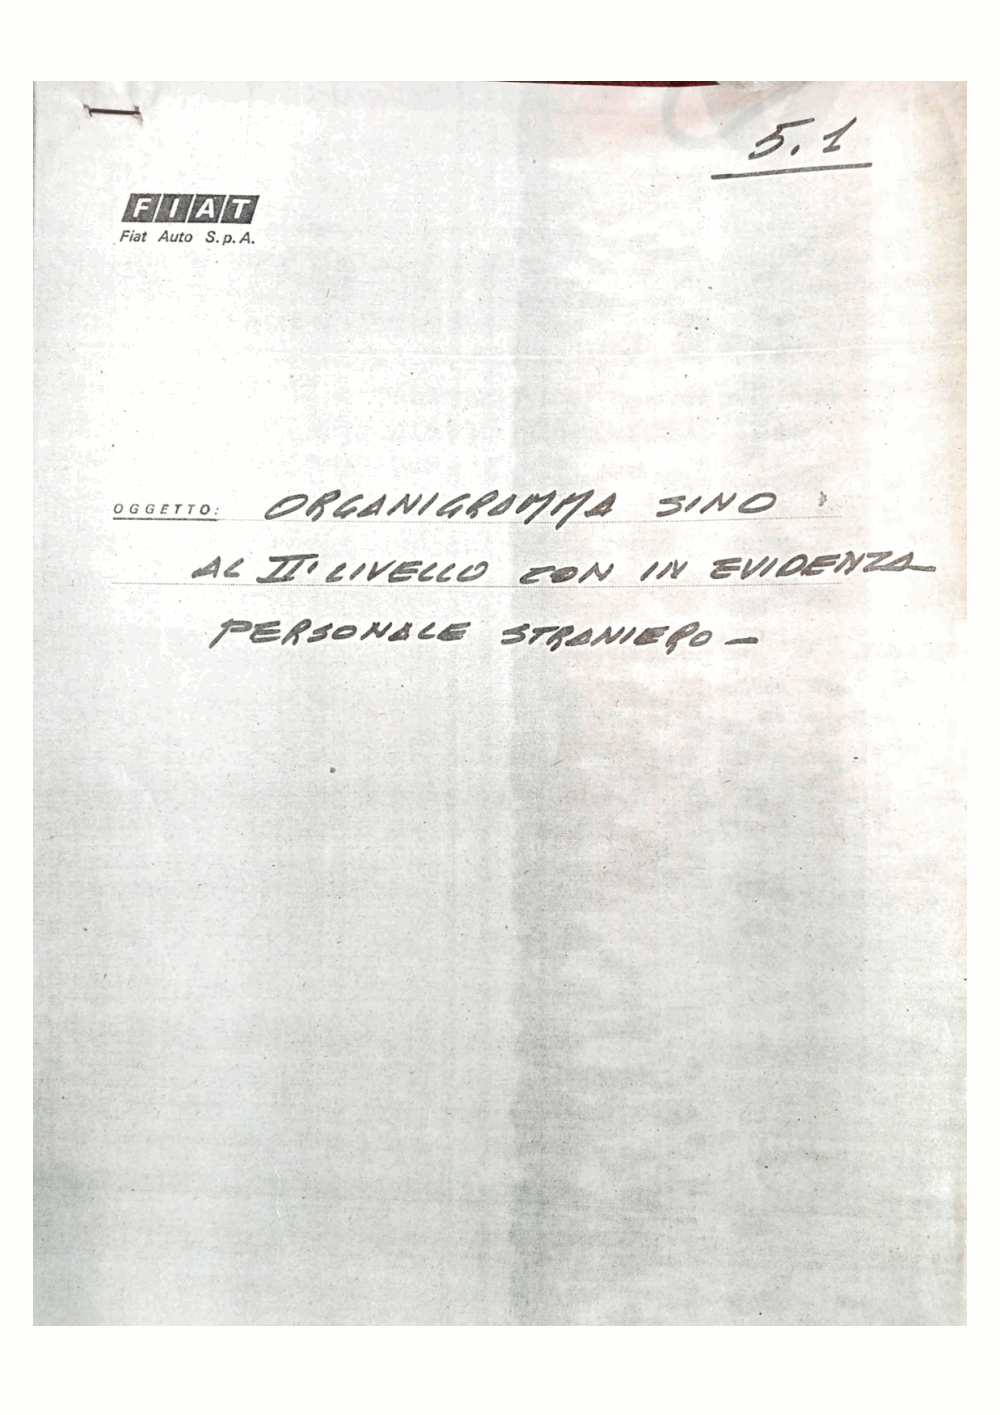 Page 1 from Archival organizational chart from Fiat’s Italian headquarters showing the Brazilian security apparatus